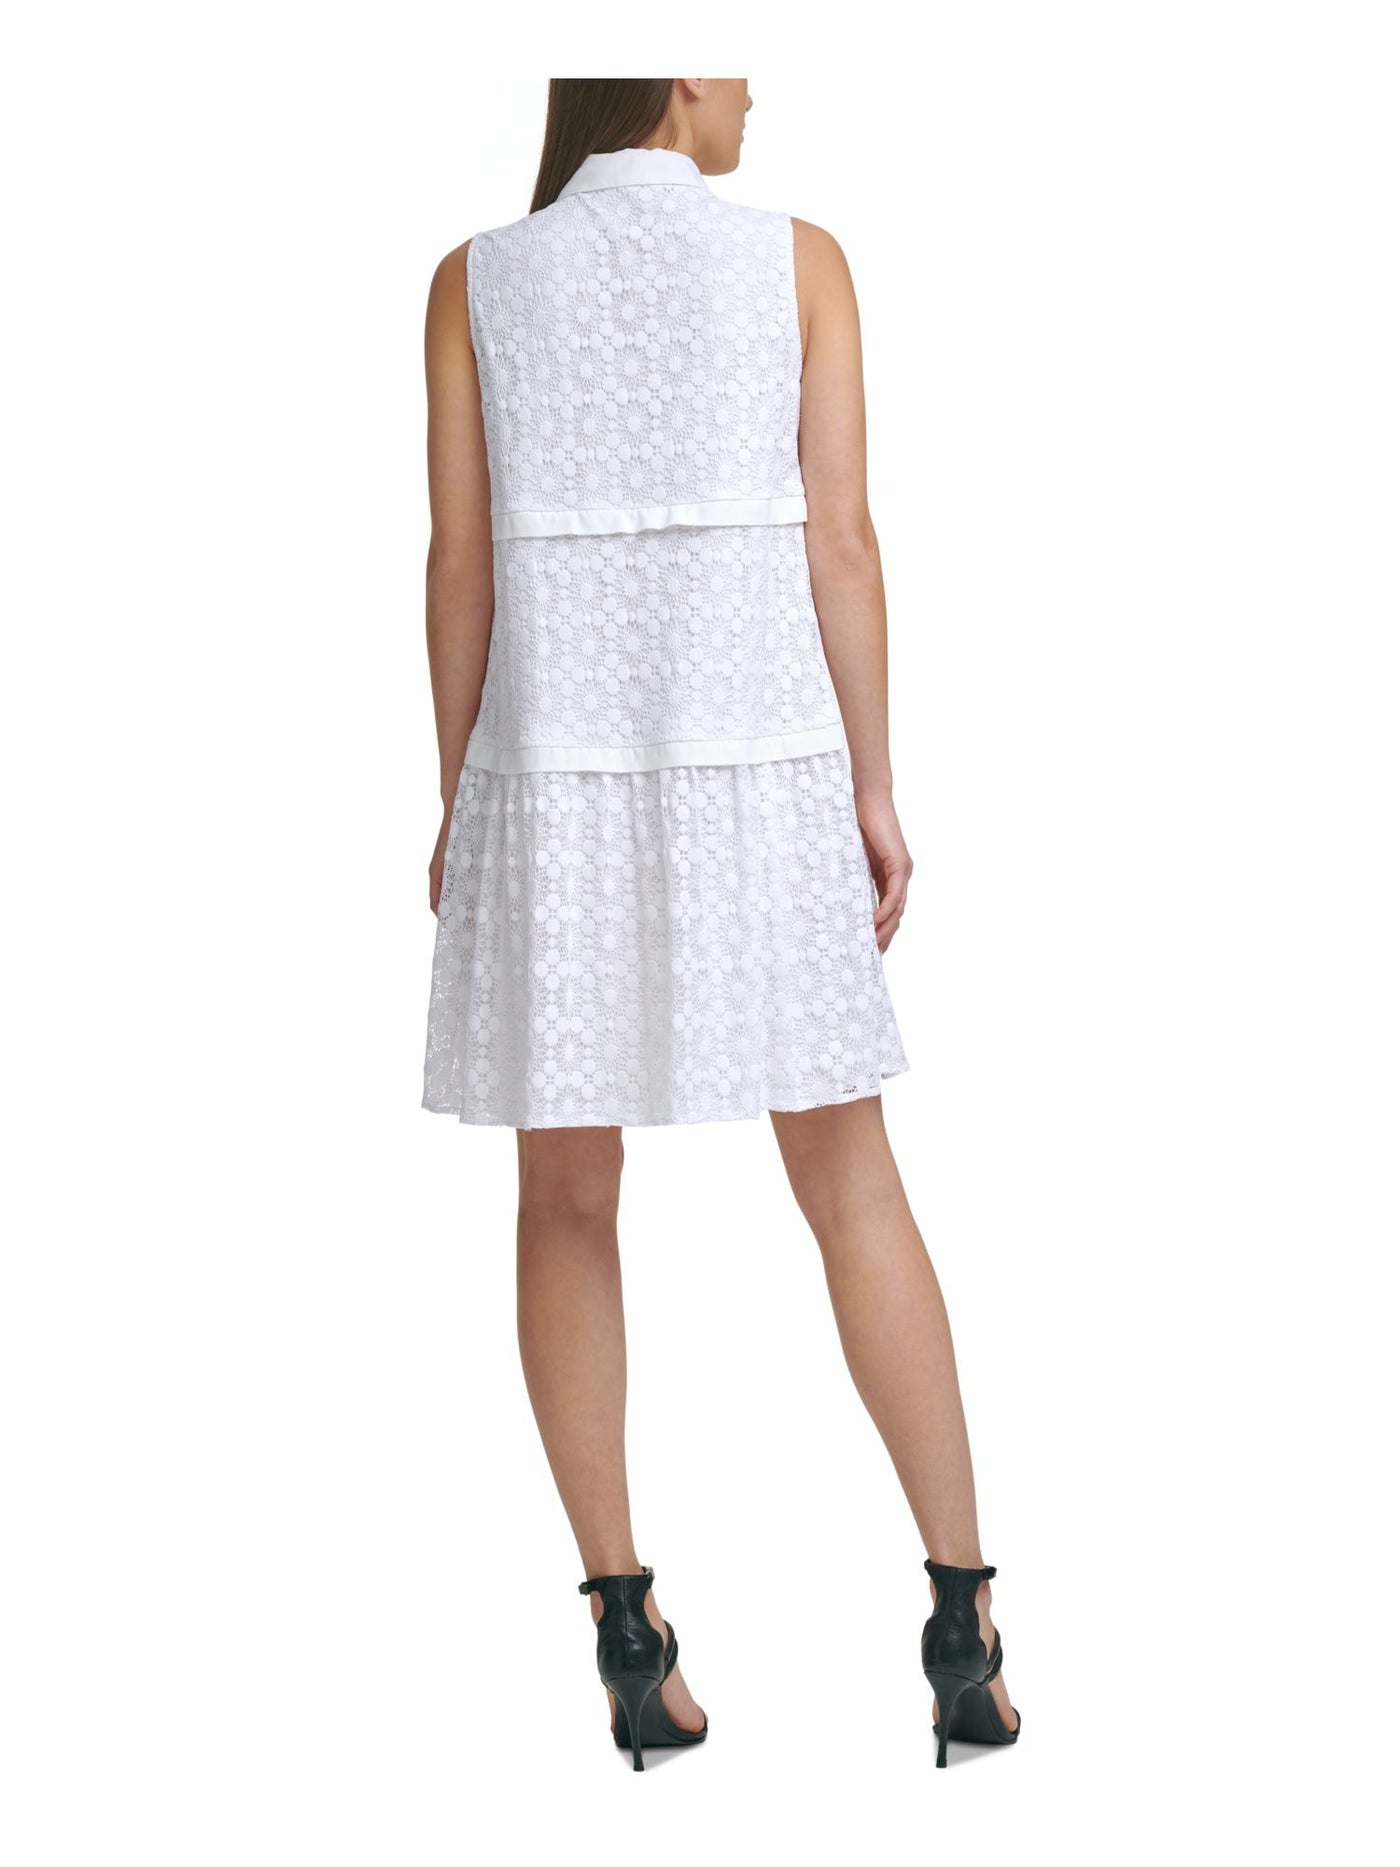 DKNY Womens Lace Tiered Button Closure Sleeveless Point Collar Above The Knee Cocktail Shirt Dress